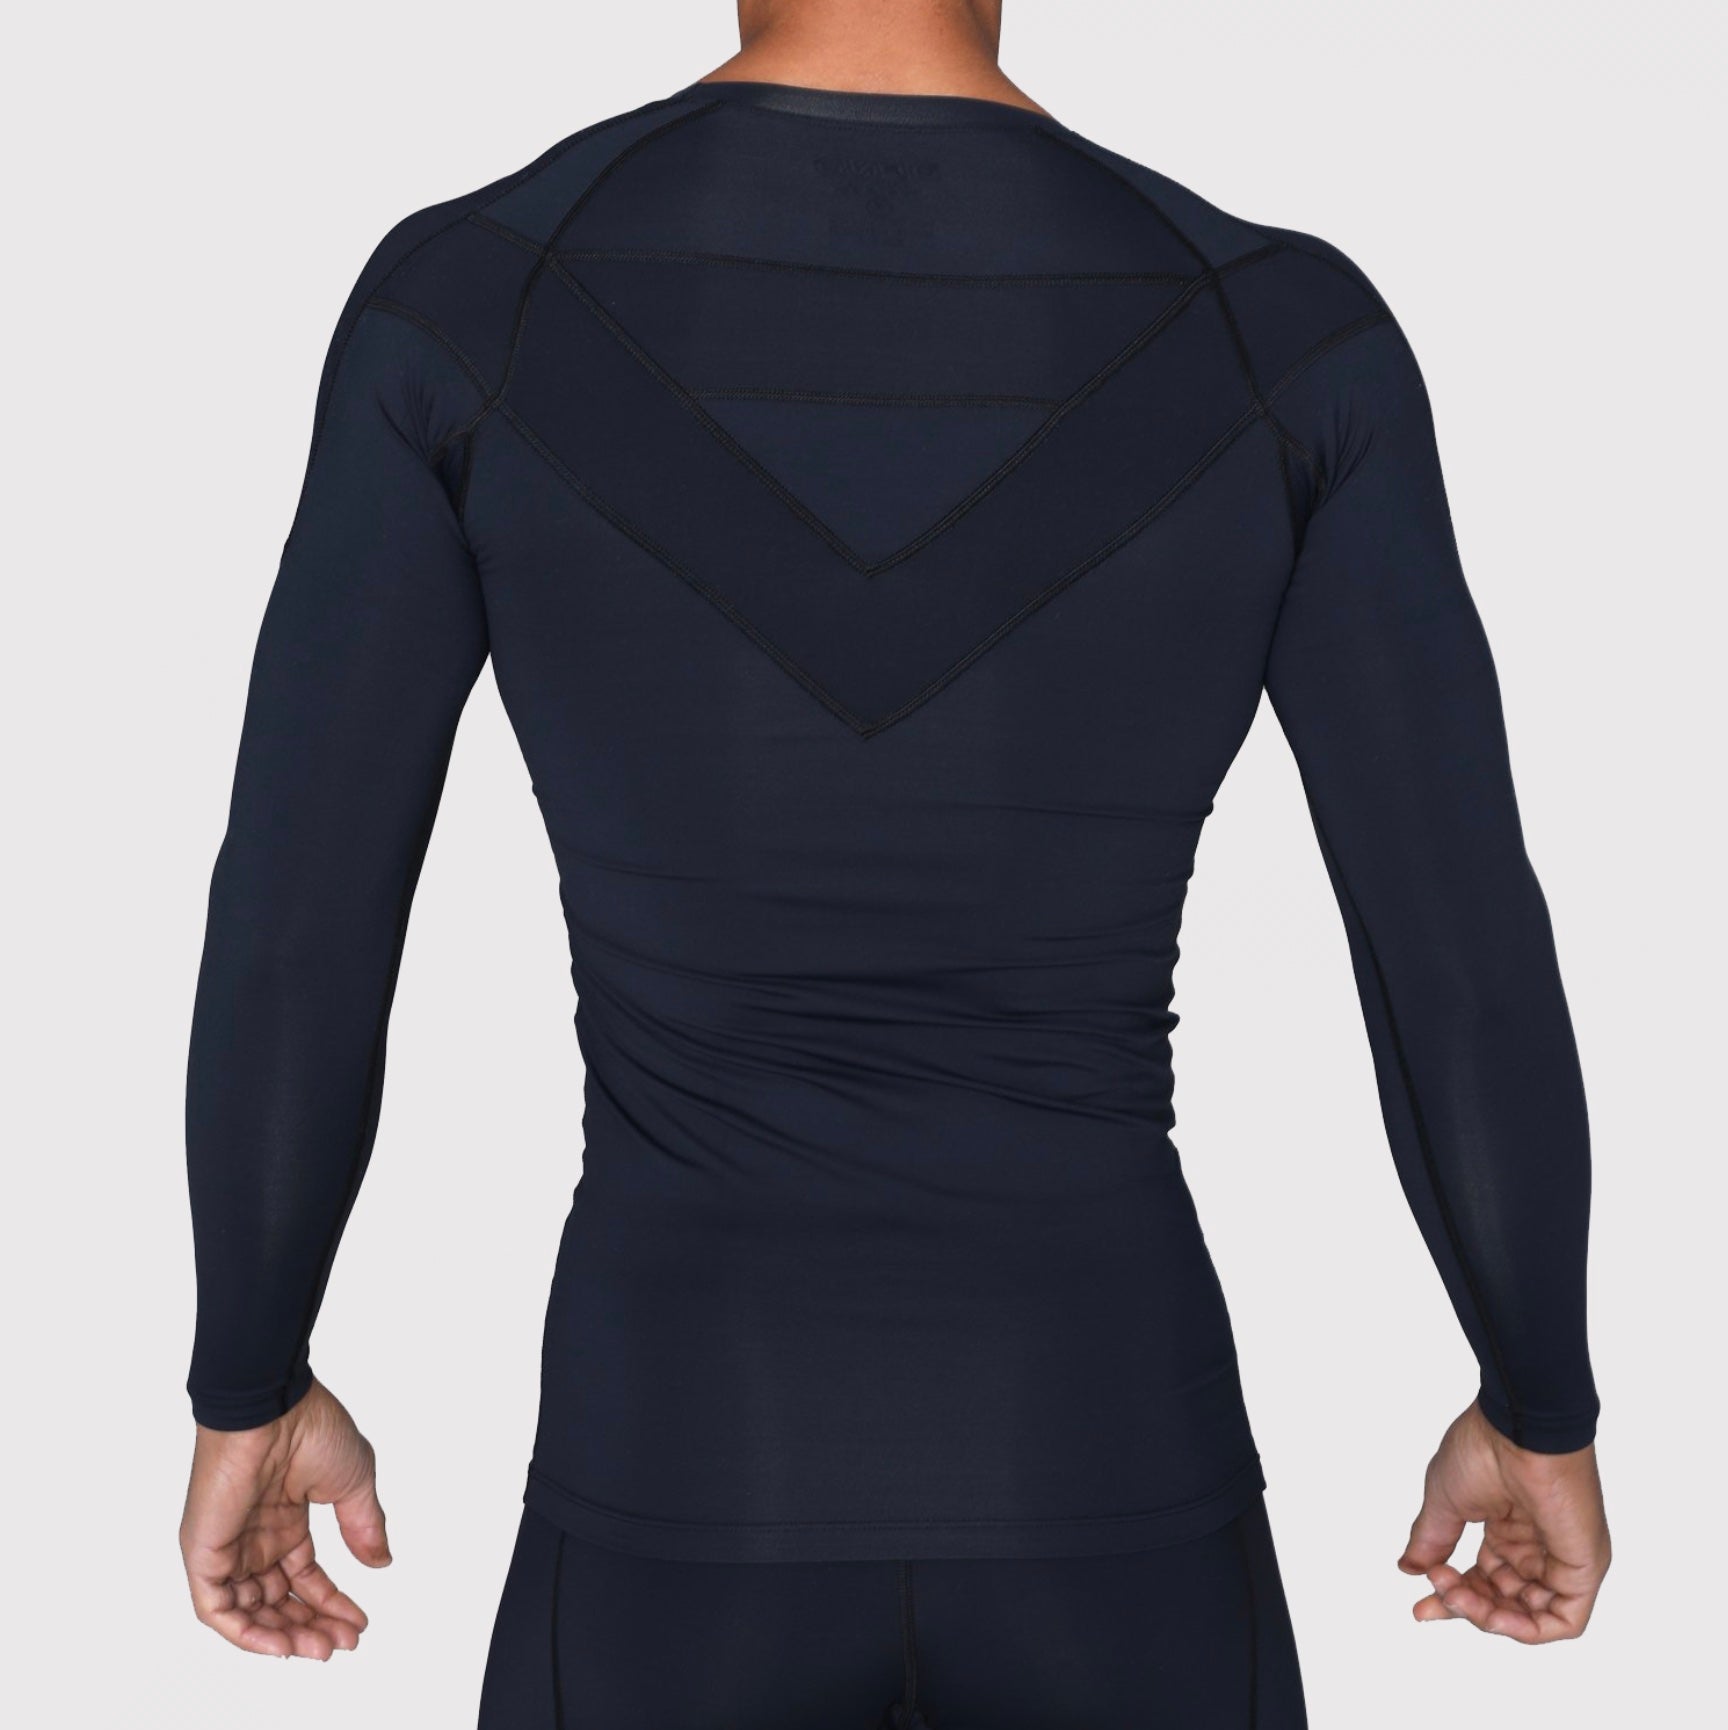 Shop Compression Wear for Recovery & Injury Prevention by Recoverite –  Recoverite